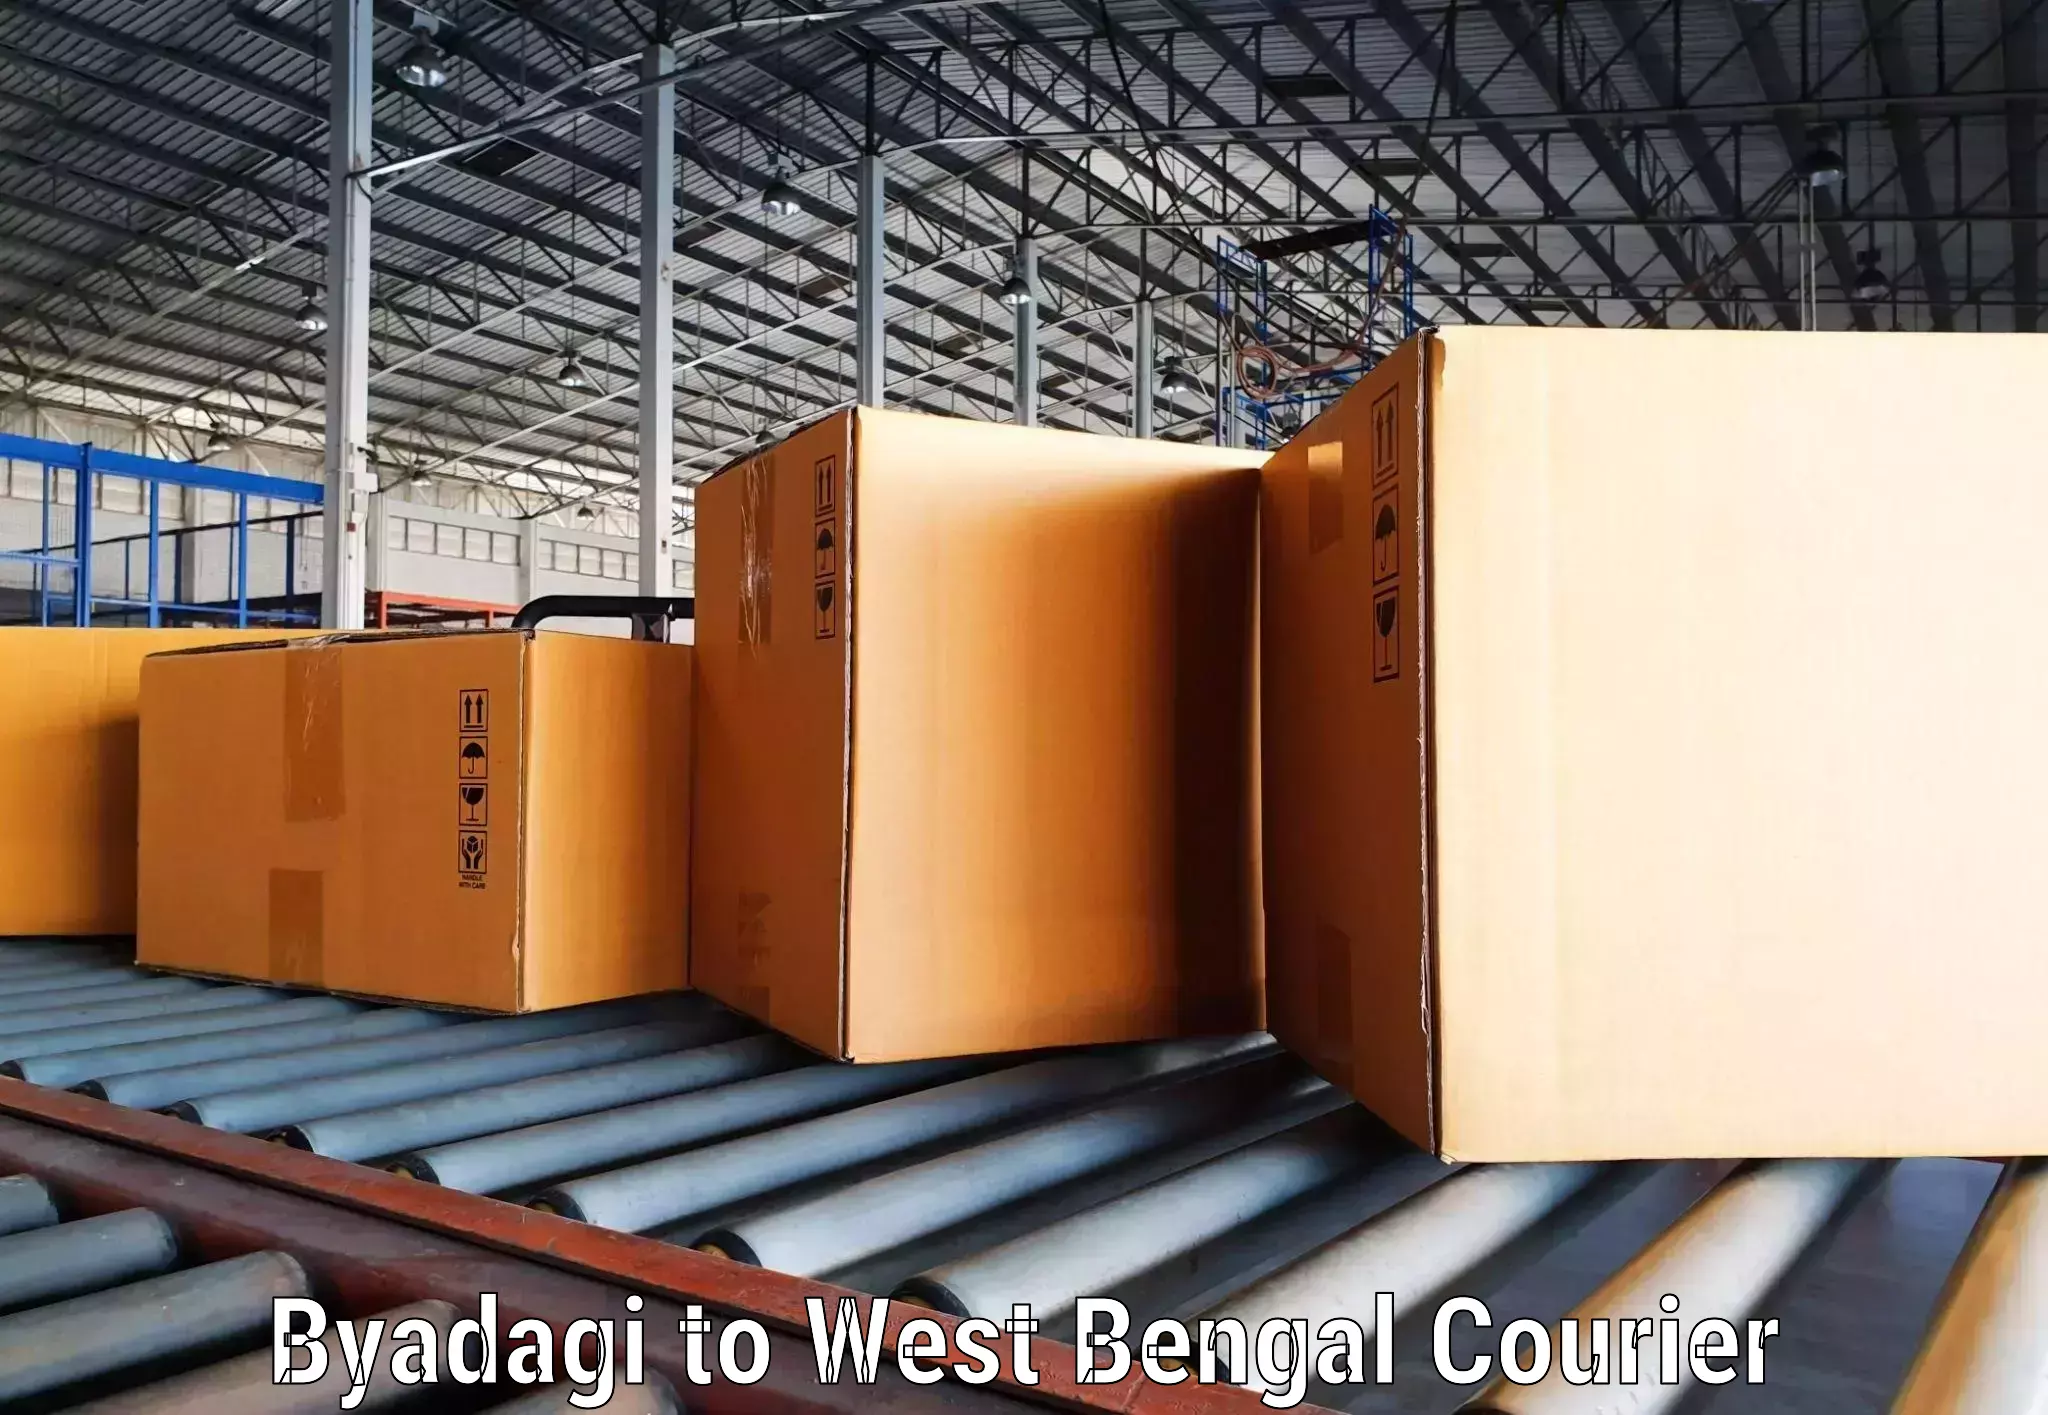 Air courier services in Byadagi to Maynaguri